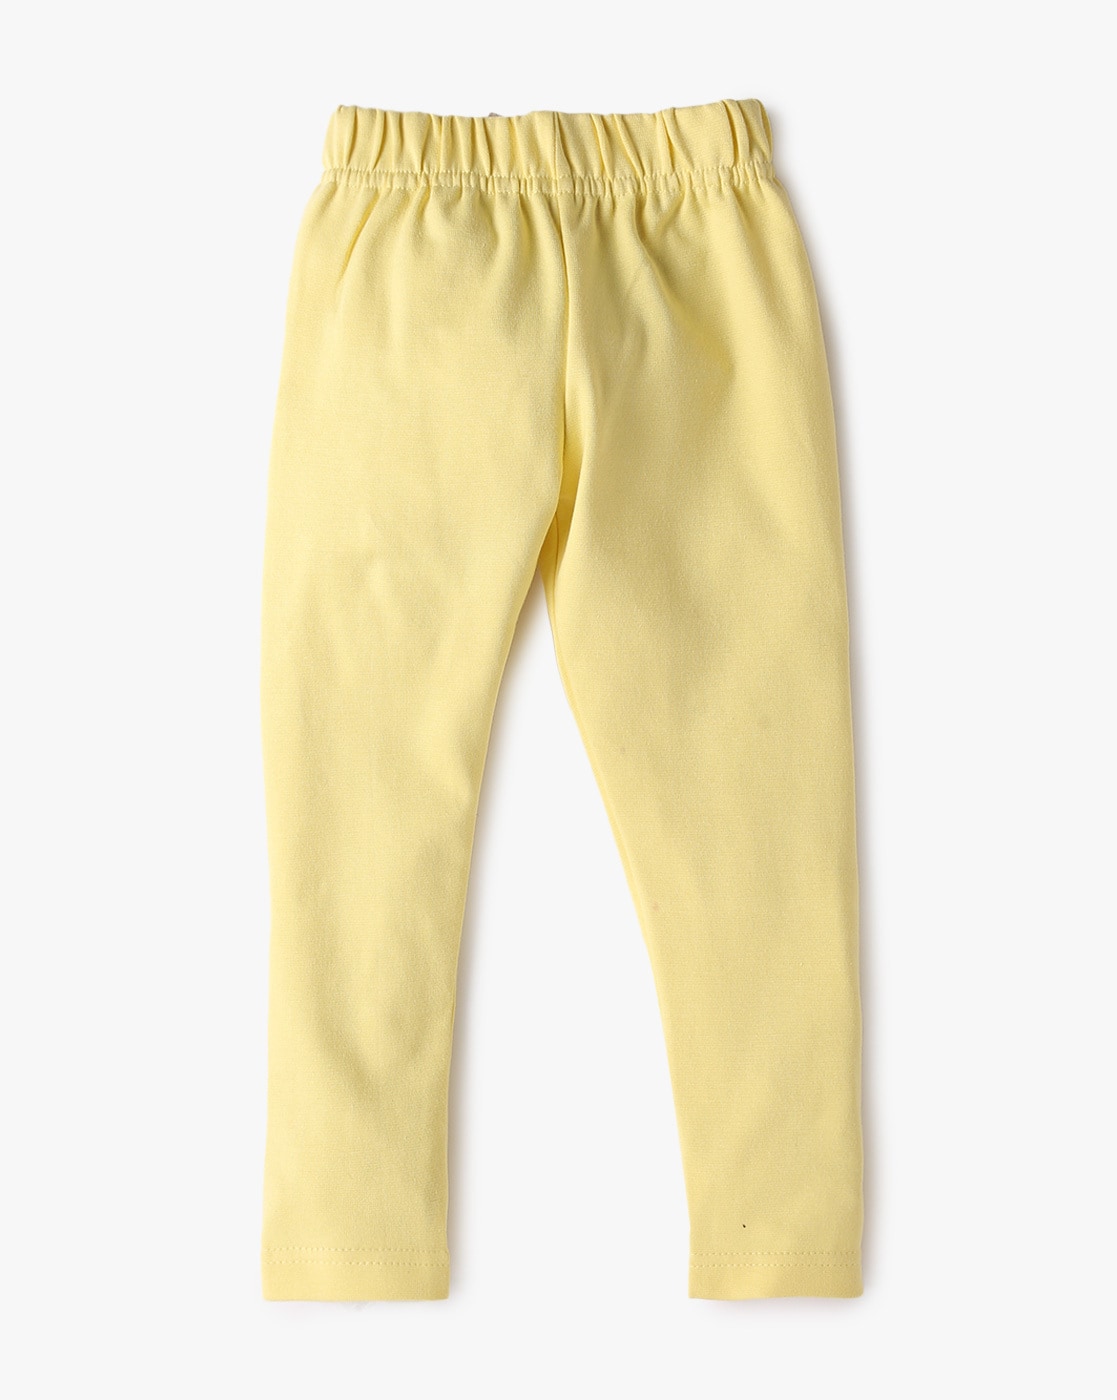 Yellow Child Footless Tights